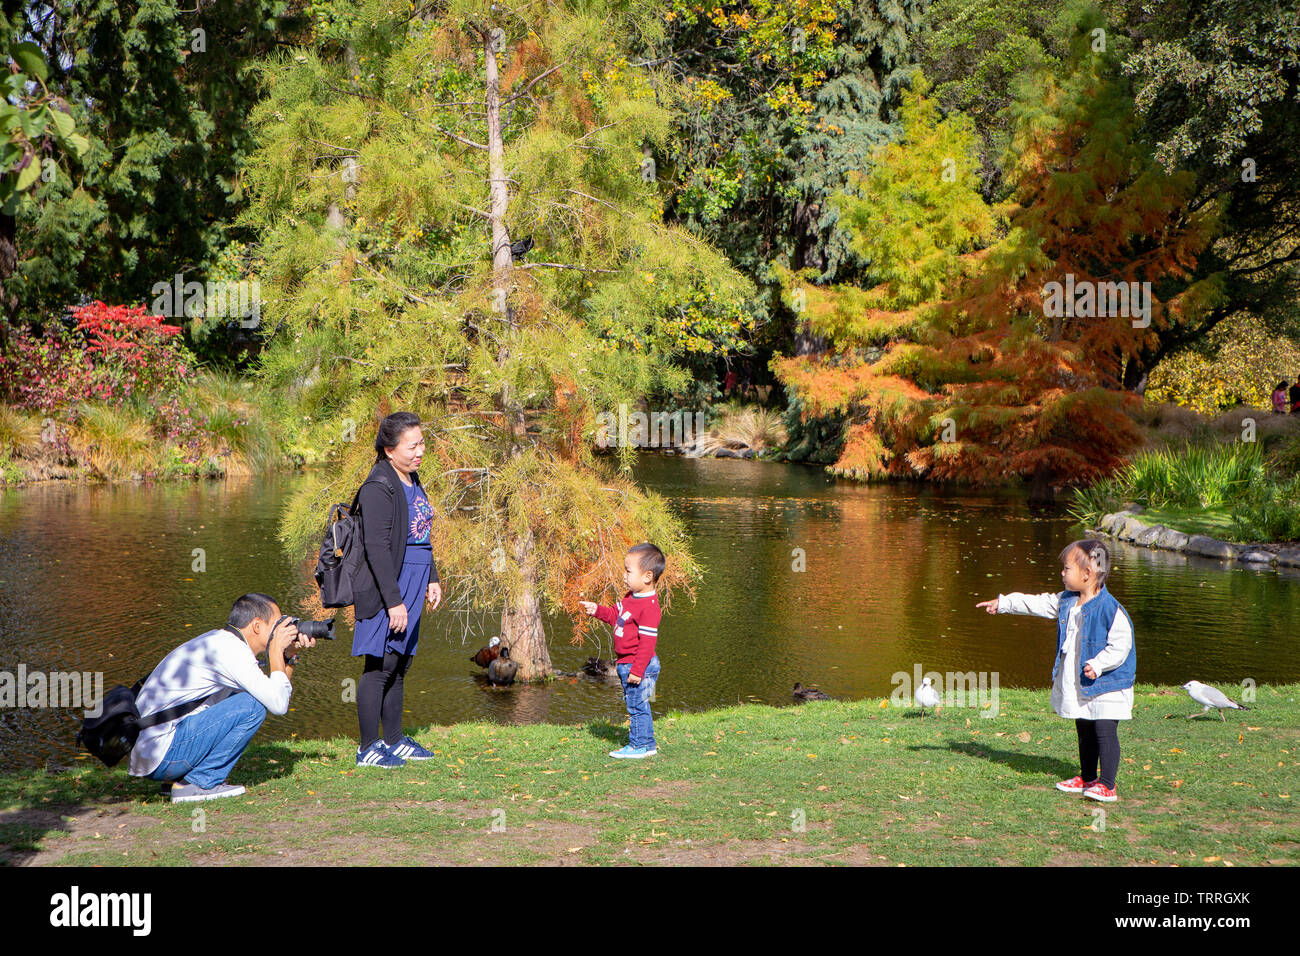 Christchurch, Canterbury, New Zealand April 27 2019: Families explore and play in the Botanic Gardens in the Christchurch city centre Stock Photo